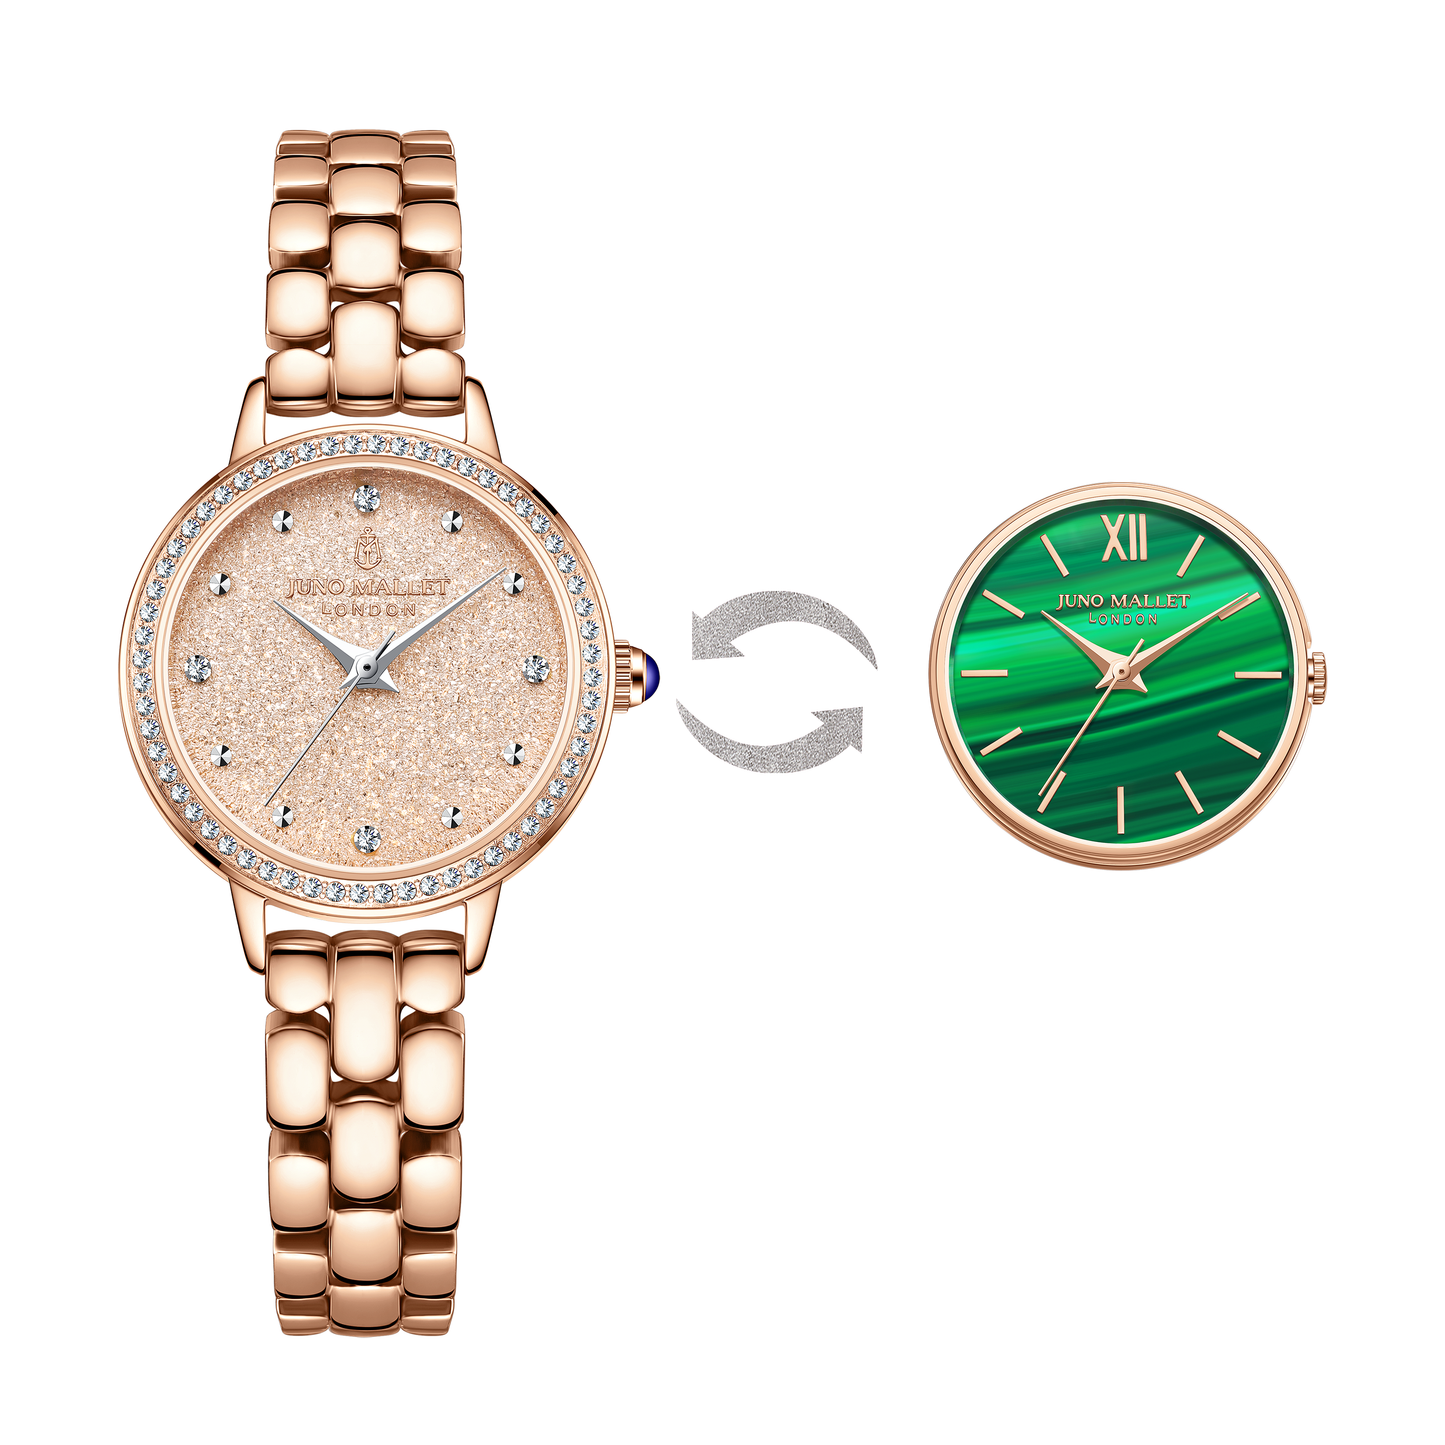 Rhinestone Golden Sparkling Watch with the 2nd Watch Dial